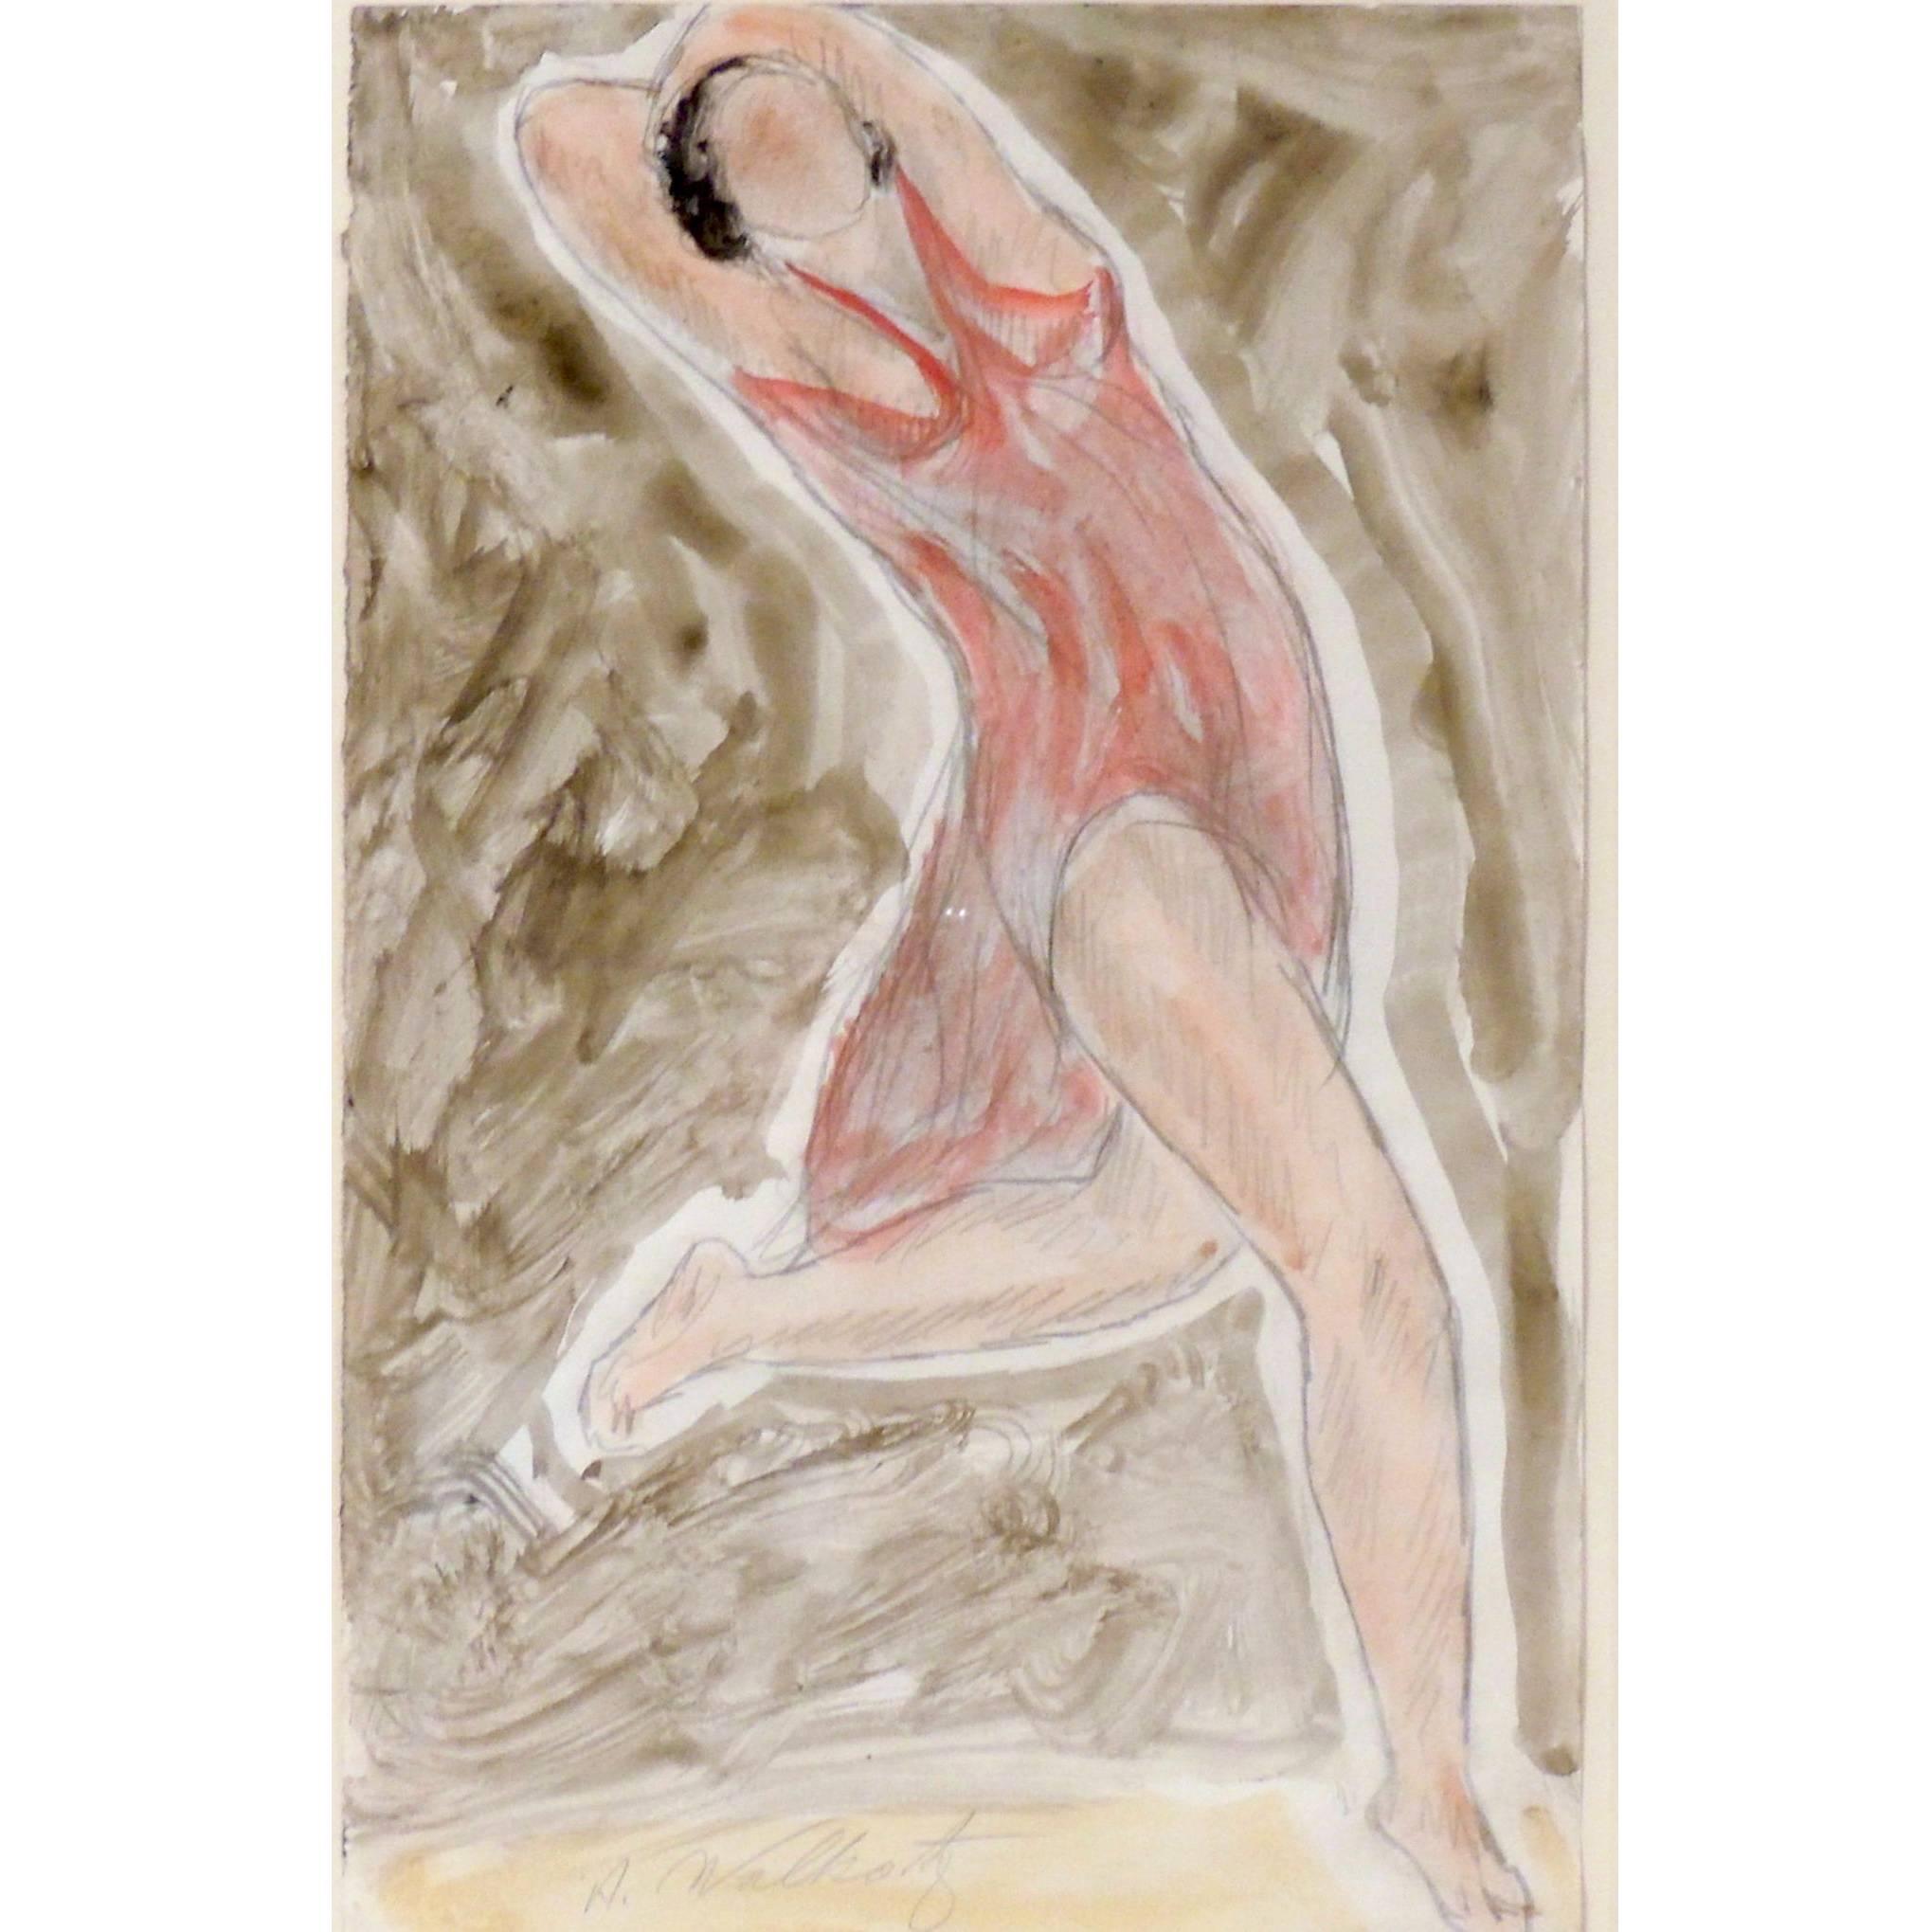 Modernist Watercolored Drawing of Dancer Isadora Duncan, by Abraham Walkowitz